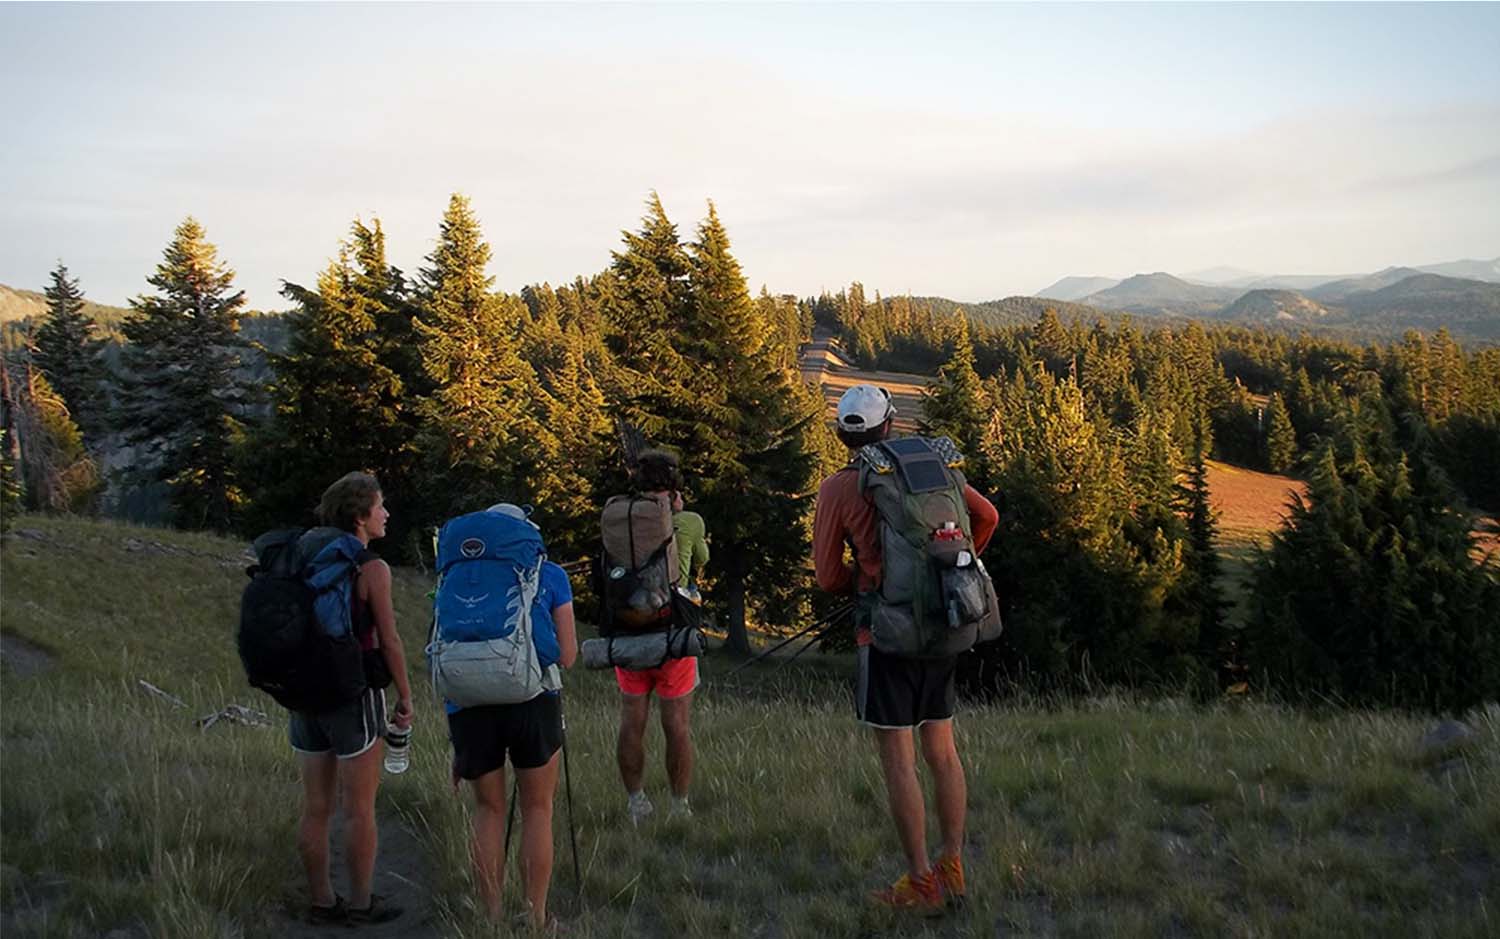 A group of four people wearing backpacks with their backs turned, looking at trees